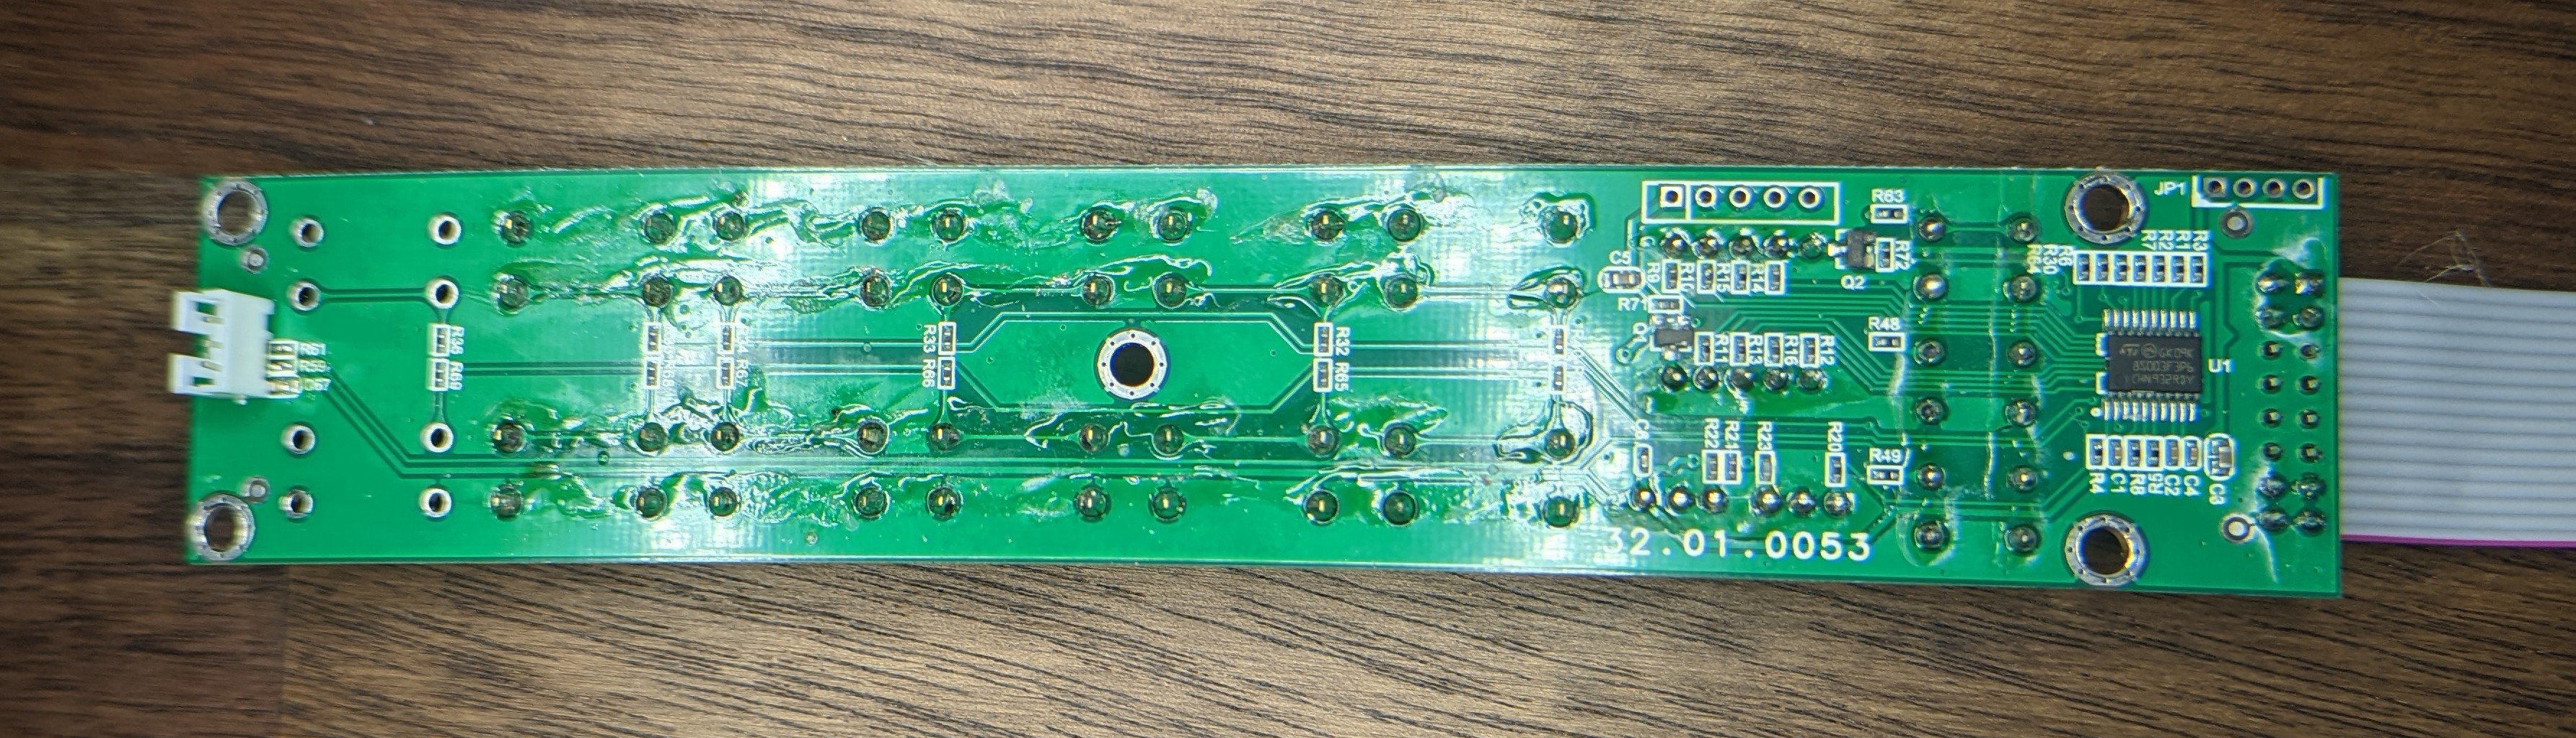 Sorry for the glare. There's a lot of flux residue on this PCB.